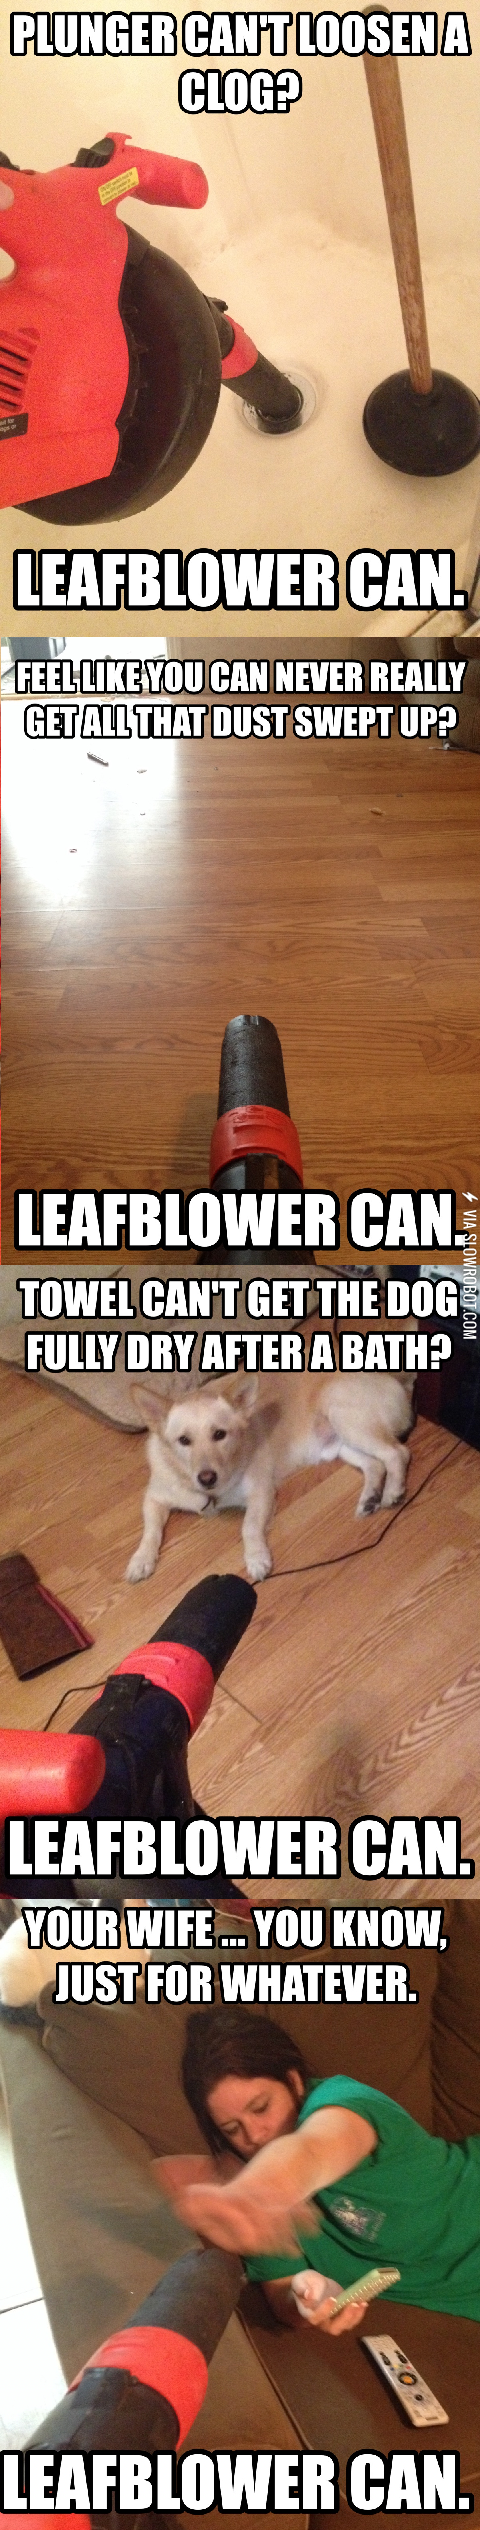 Leafblower+can%21